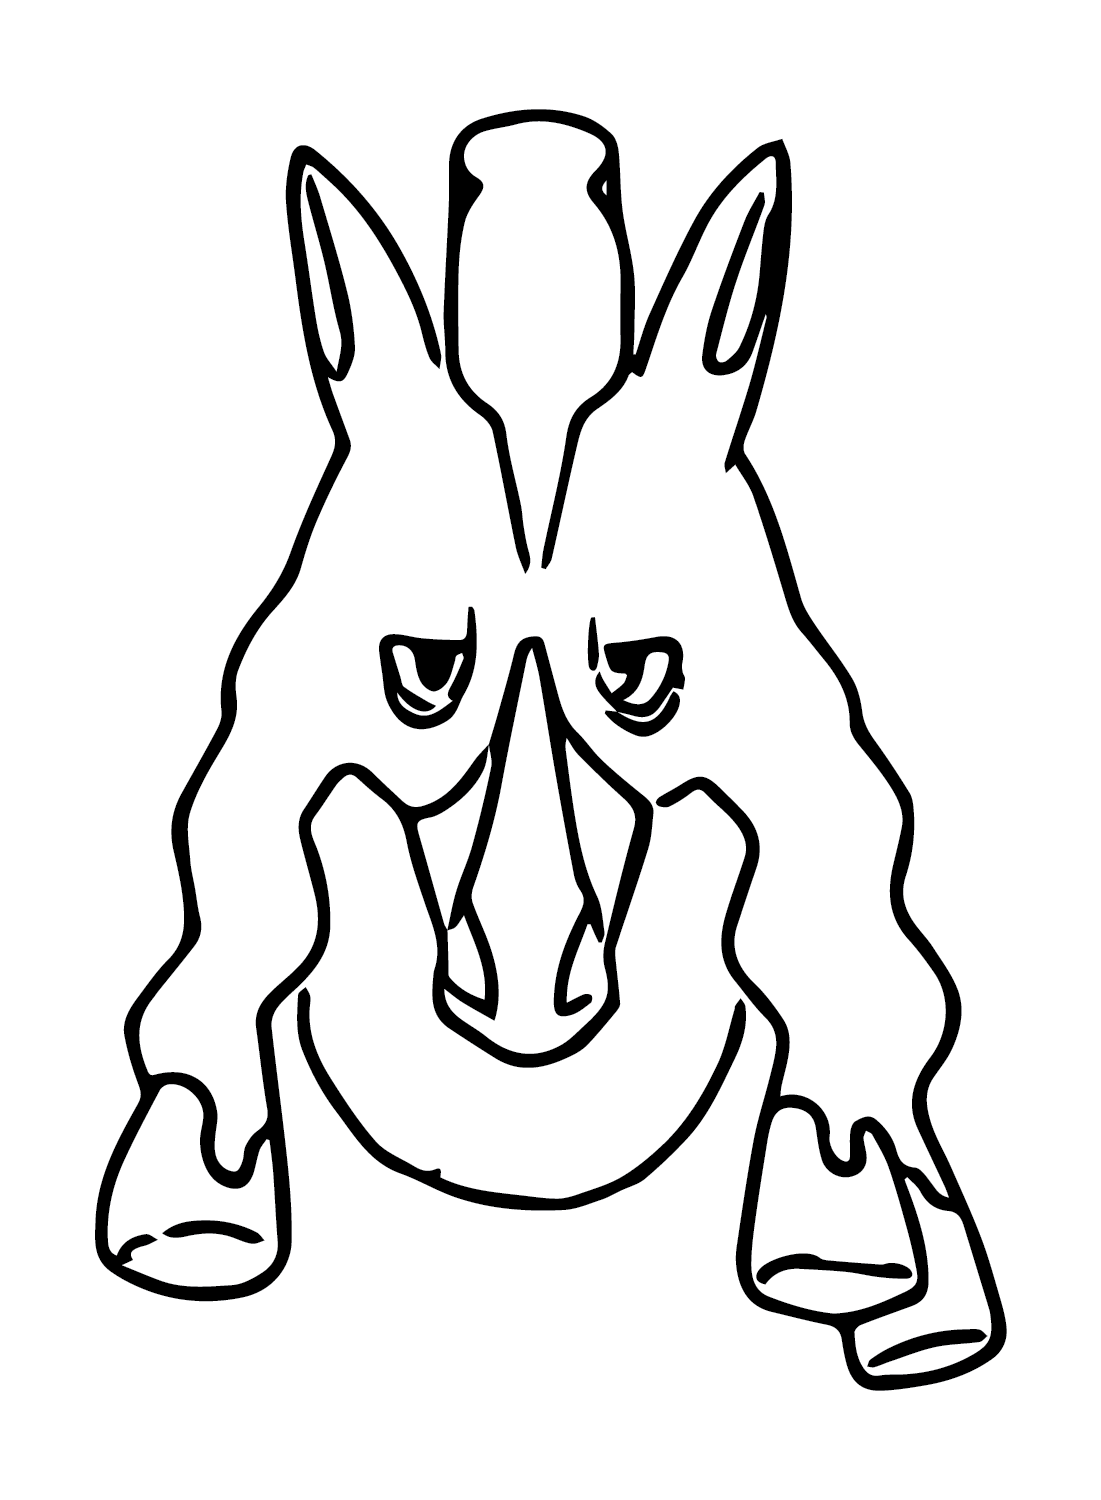 Mudsdale can Color Coloring Page